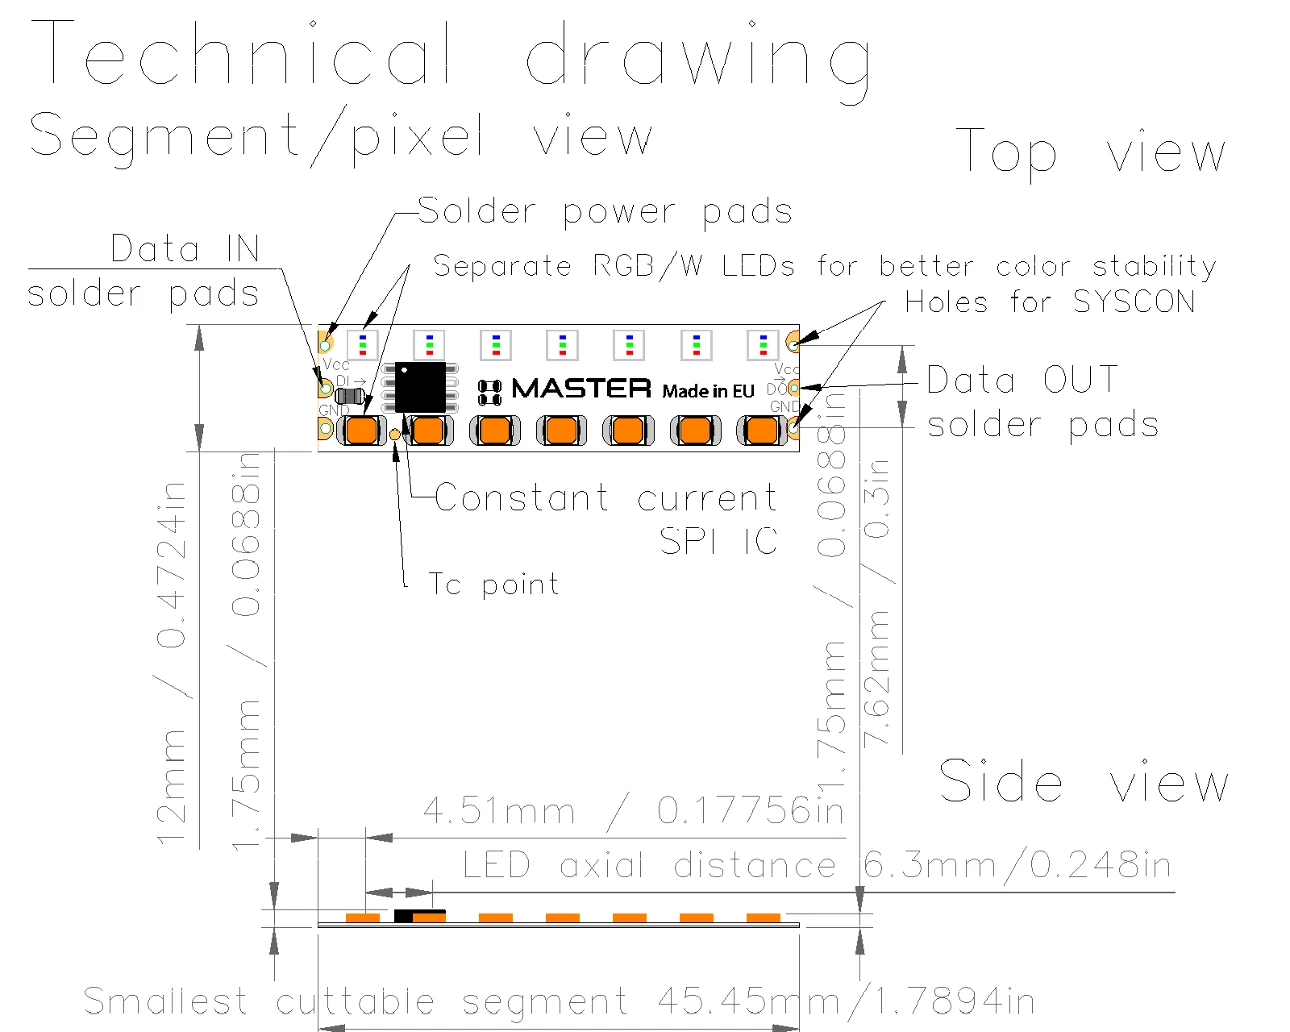 Digitally controlled SPI LED tape segment technical drawing showing 1 pixel with 7pcs white LEDs, 7pcs RGB LEDs and SPI IC TM1814